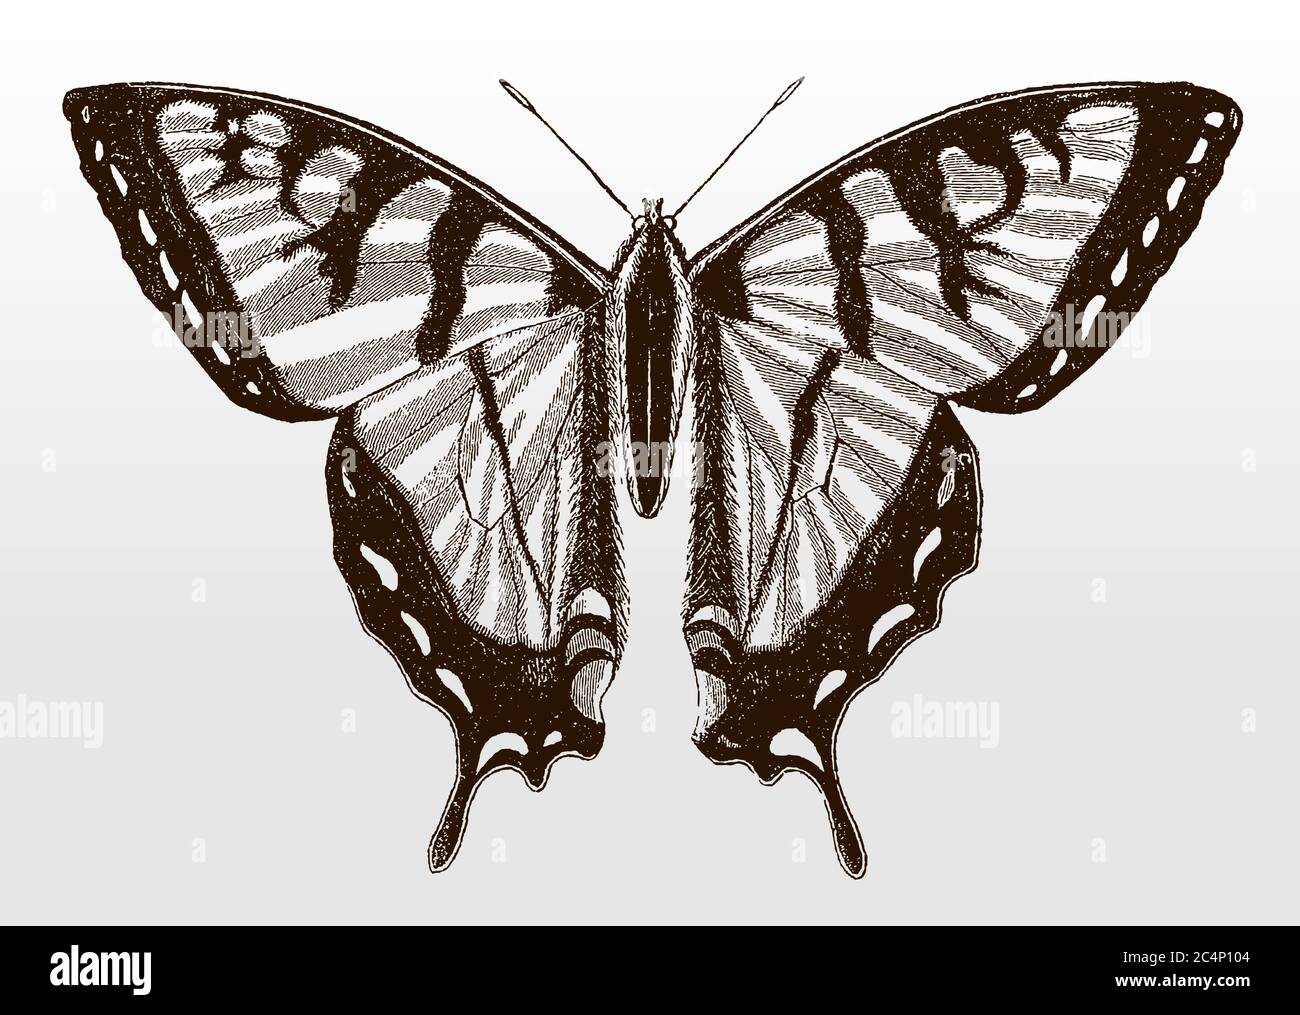 Eastern tiger swallowtail, papilio glaucus, in top view from eastern North America after an antique illustration from the 19th century Stock Vector